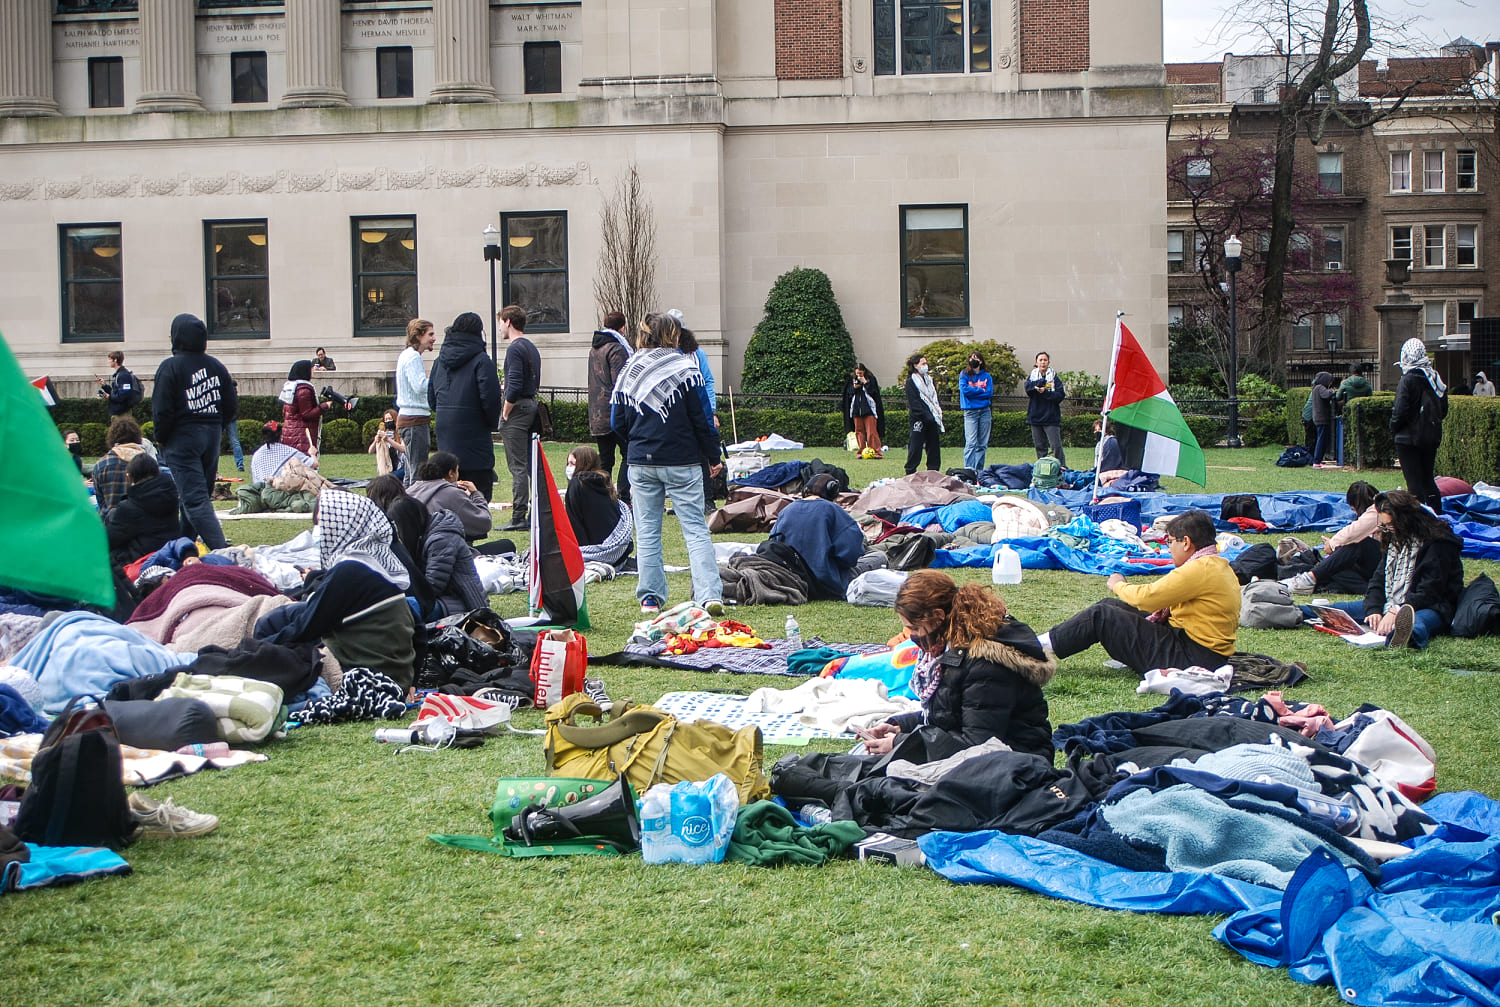 Columbia University protesters resume demonstrations after mass arrests